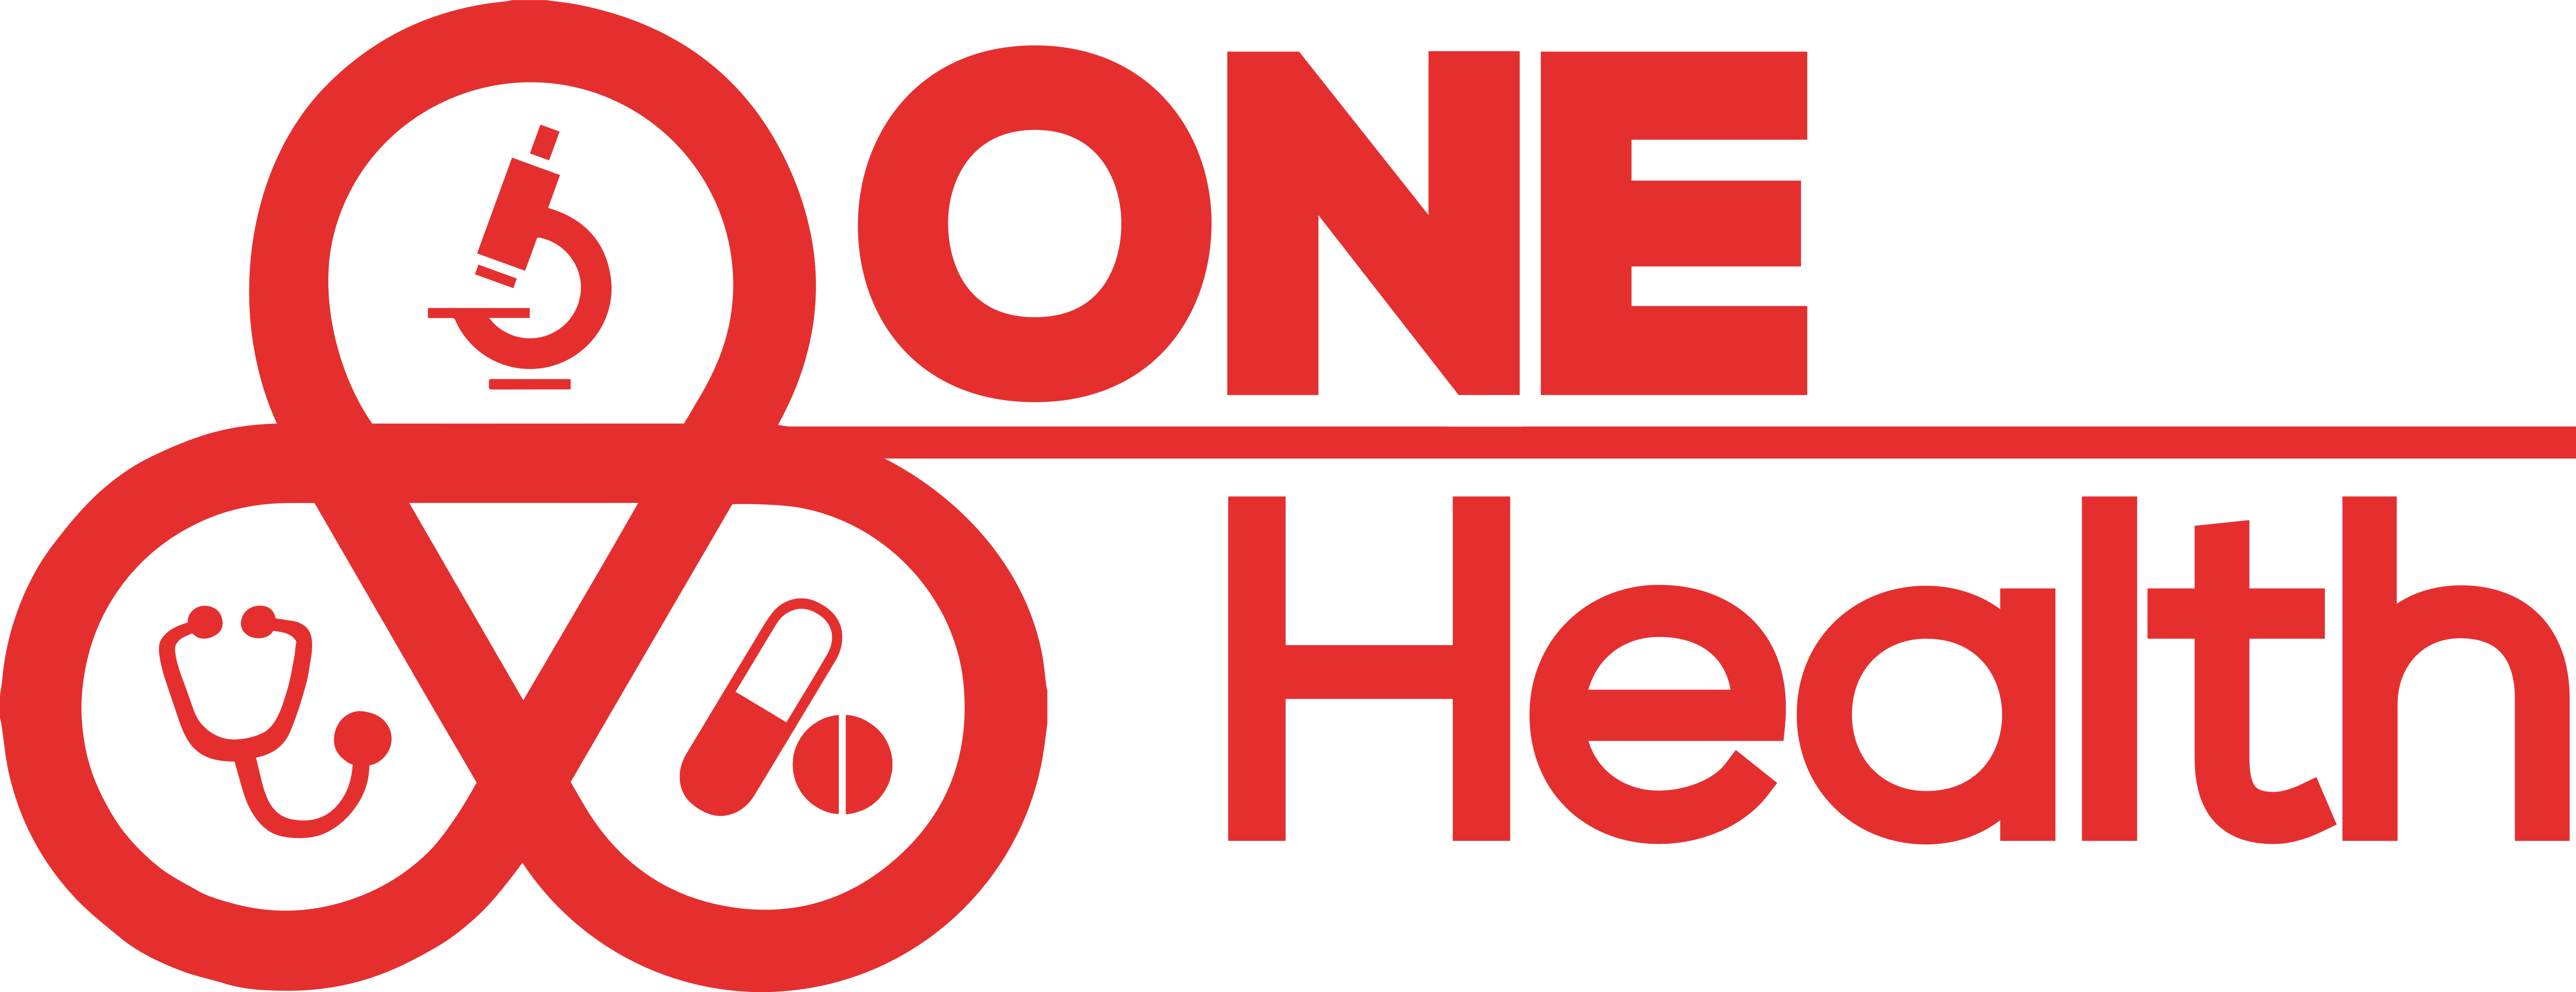 One Health Labs